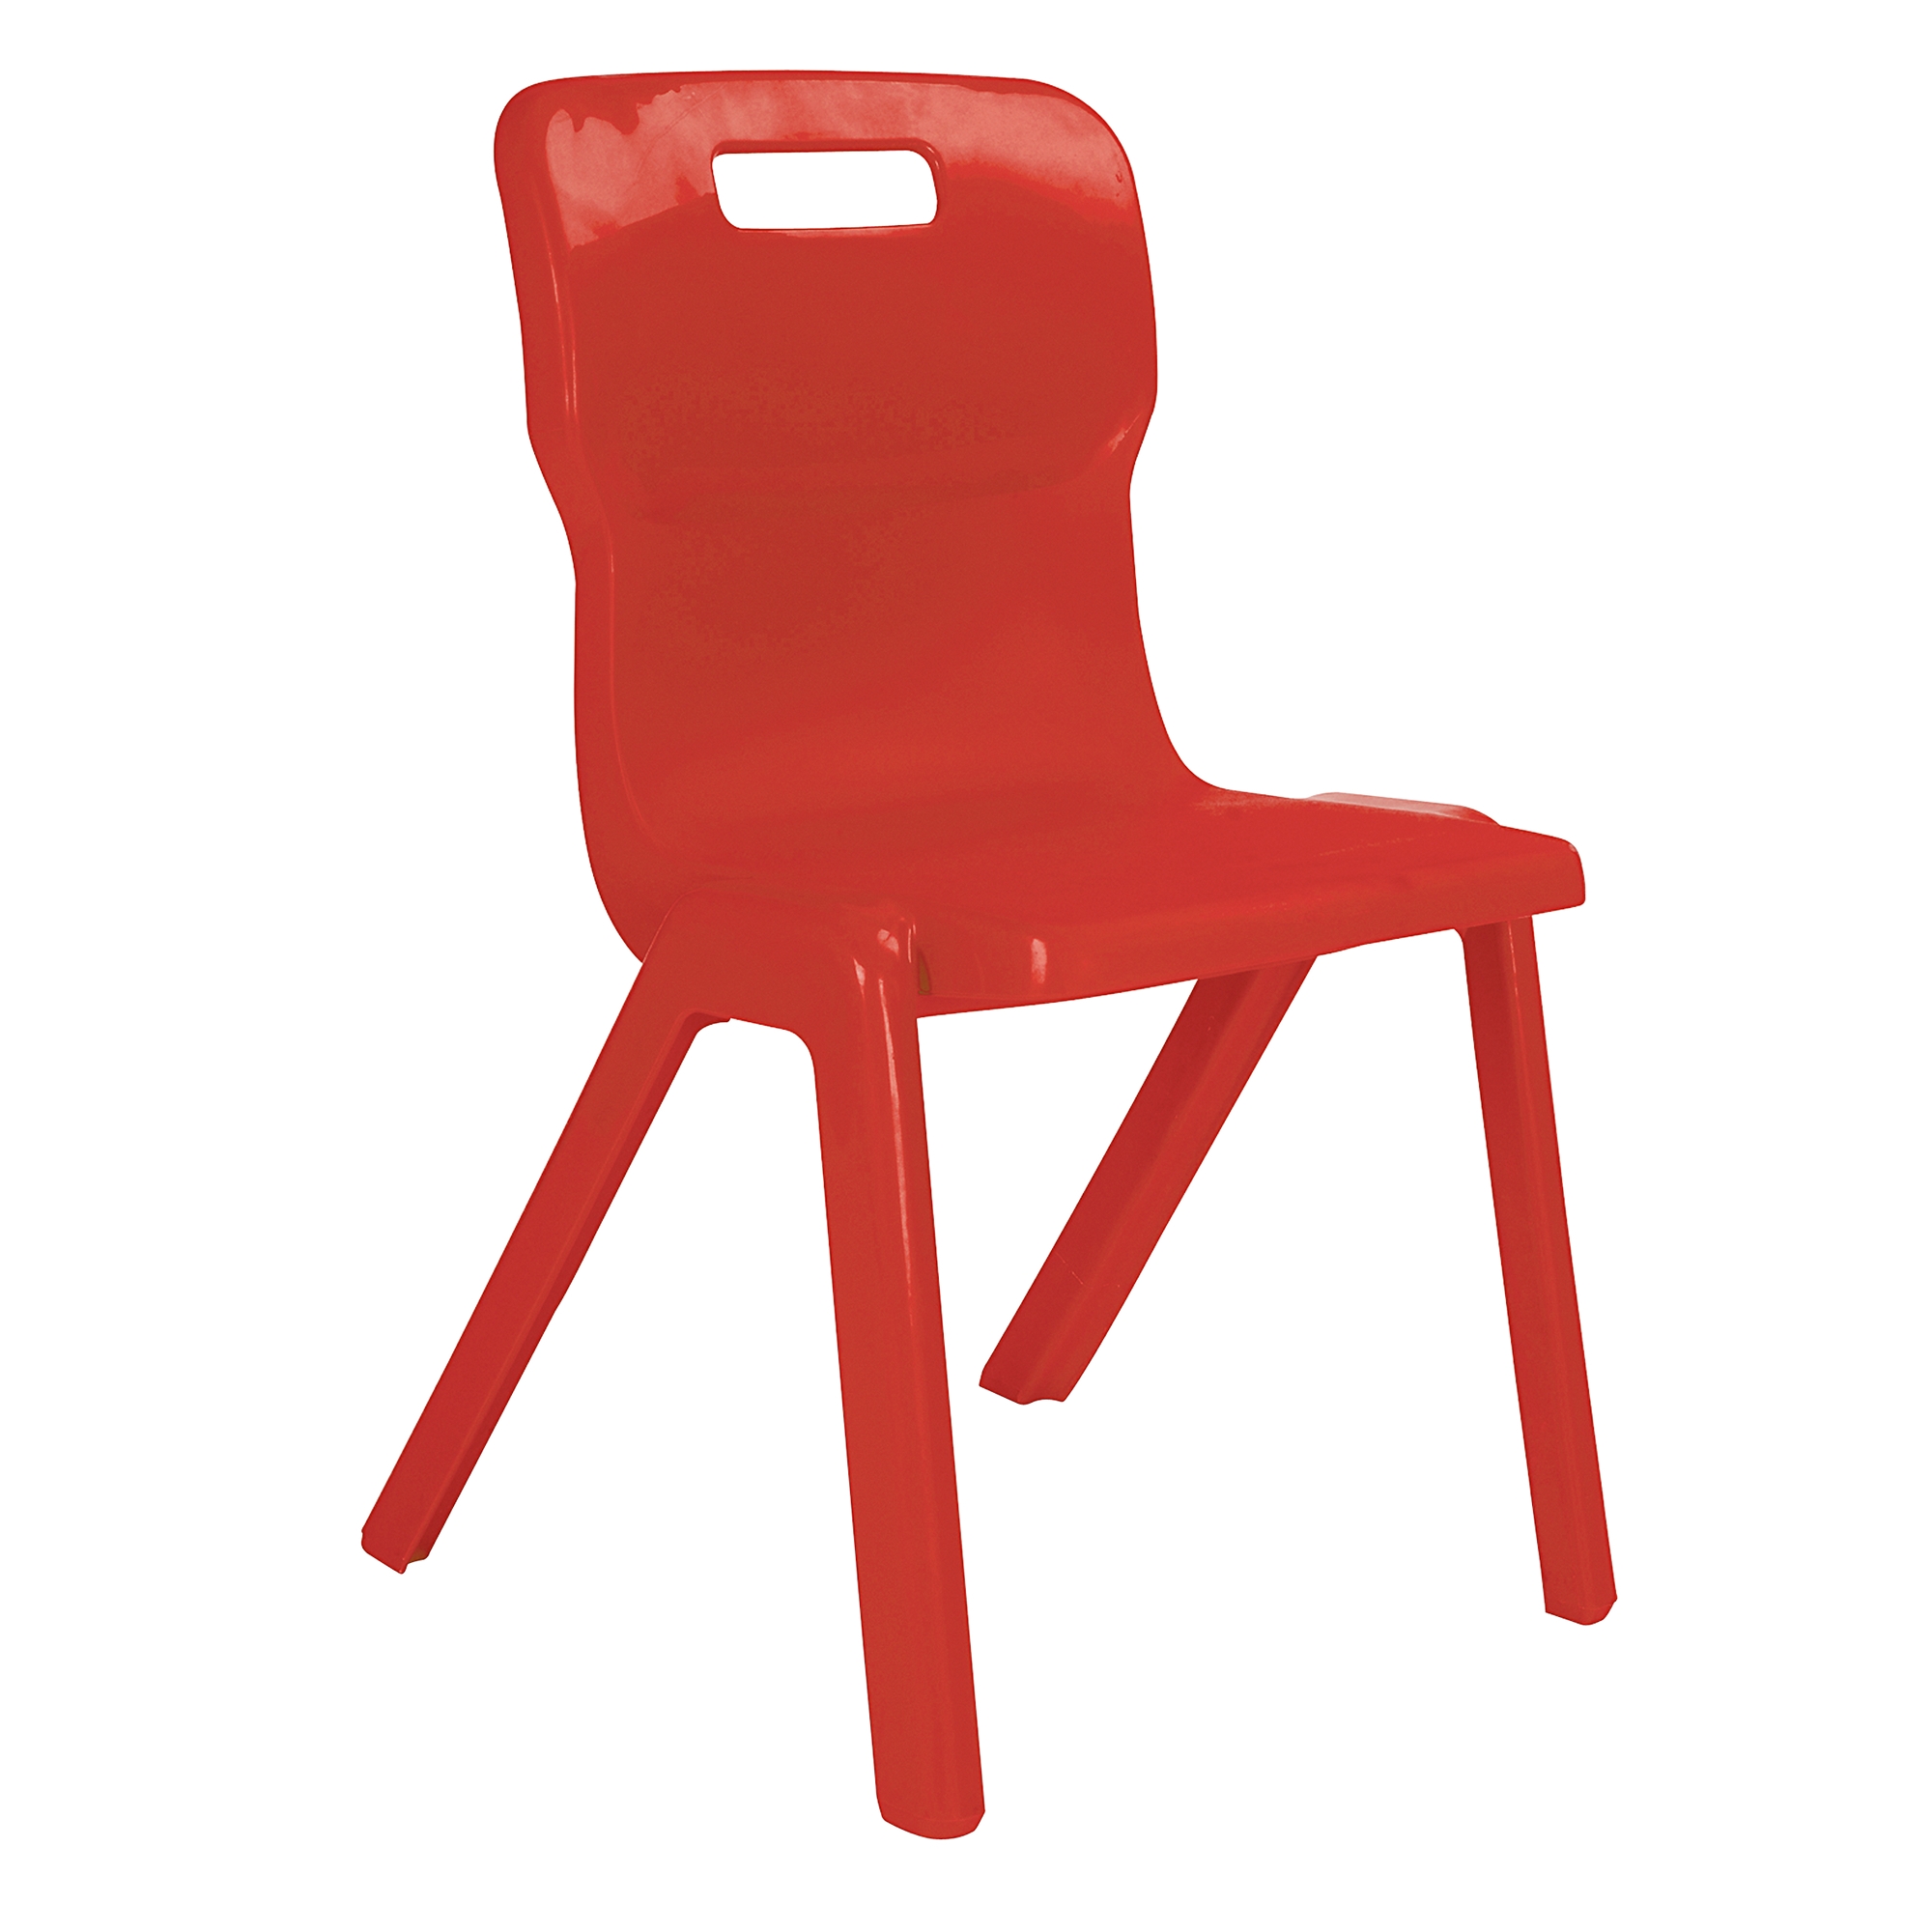 One Piece Titan Chair - Size 6 Age 14+ Red